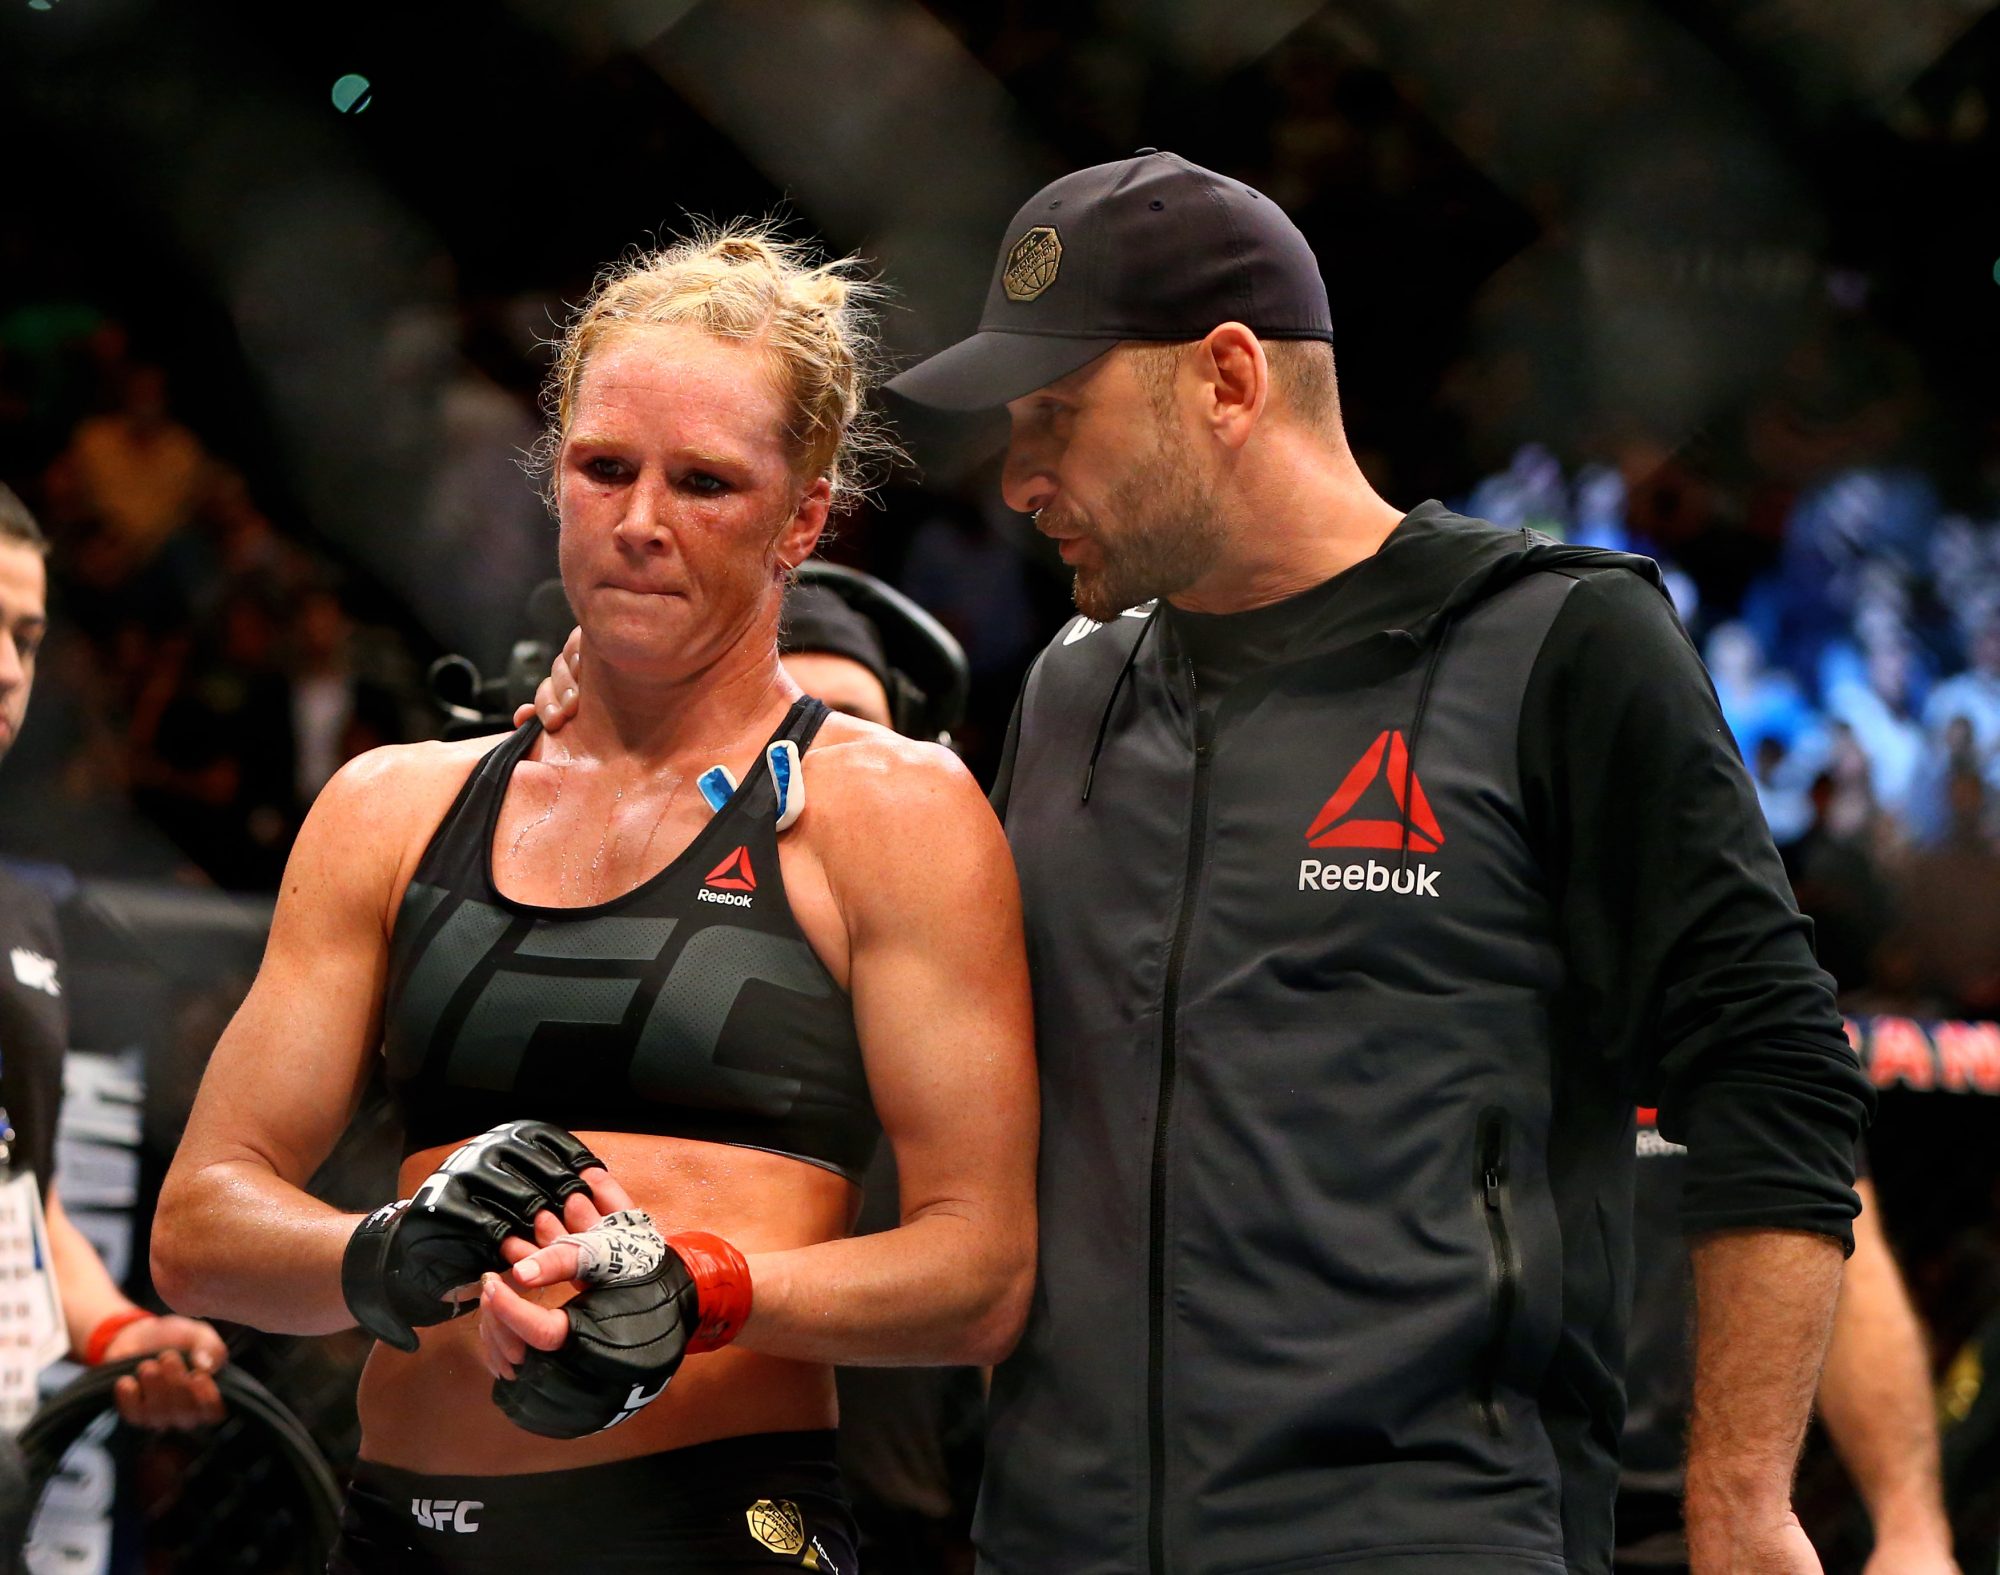 UFC 208: Holly Holm hasn't won a fight since destroying Ronda Rousey 